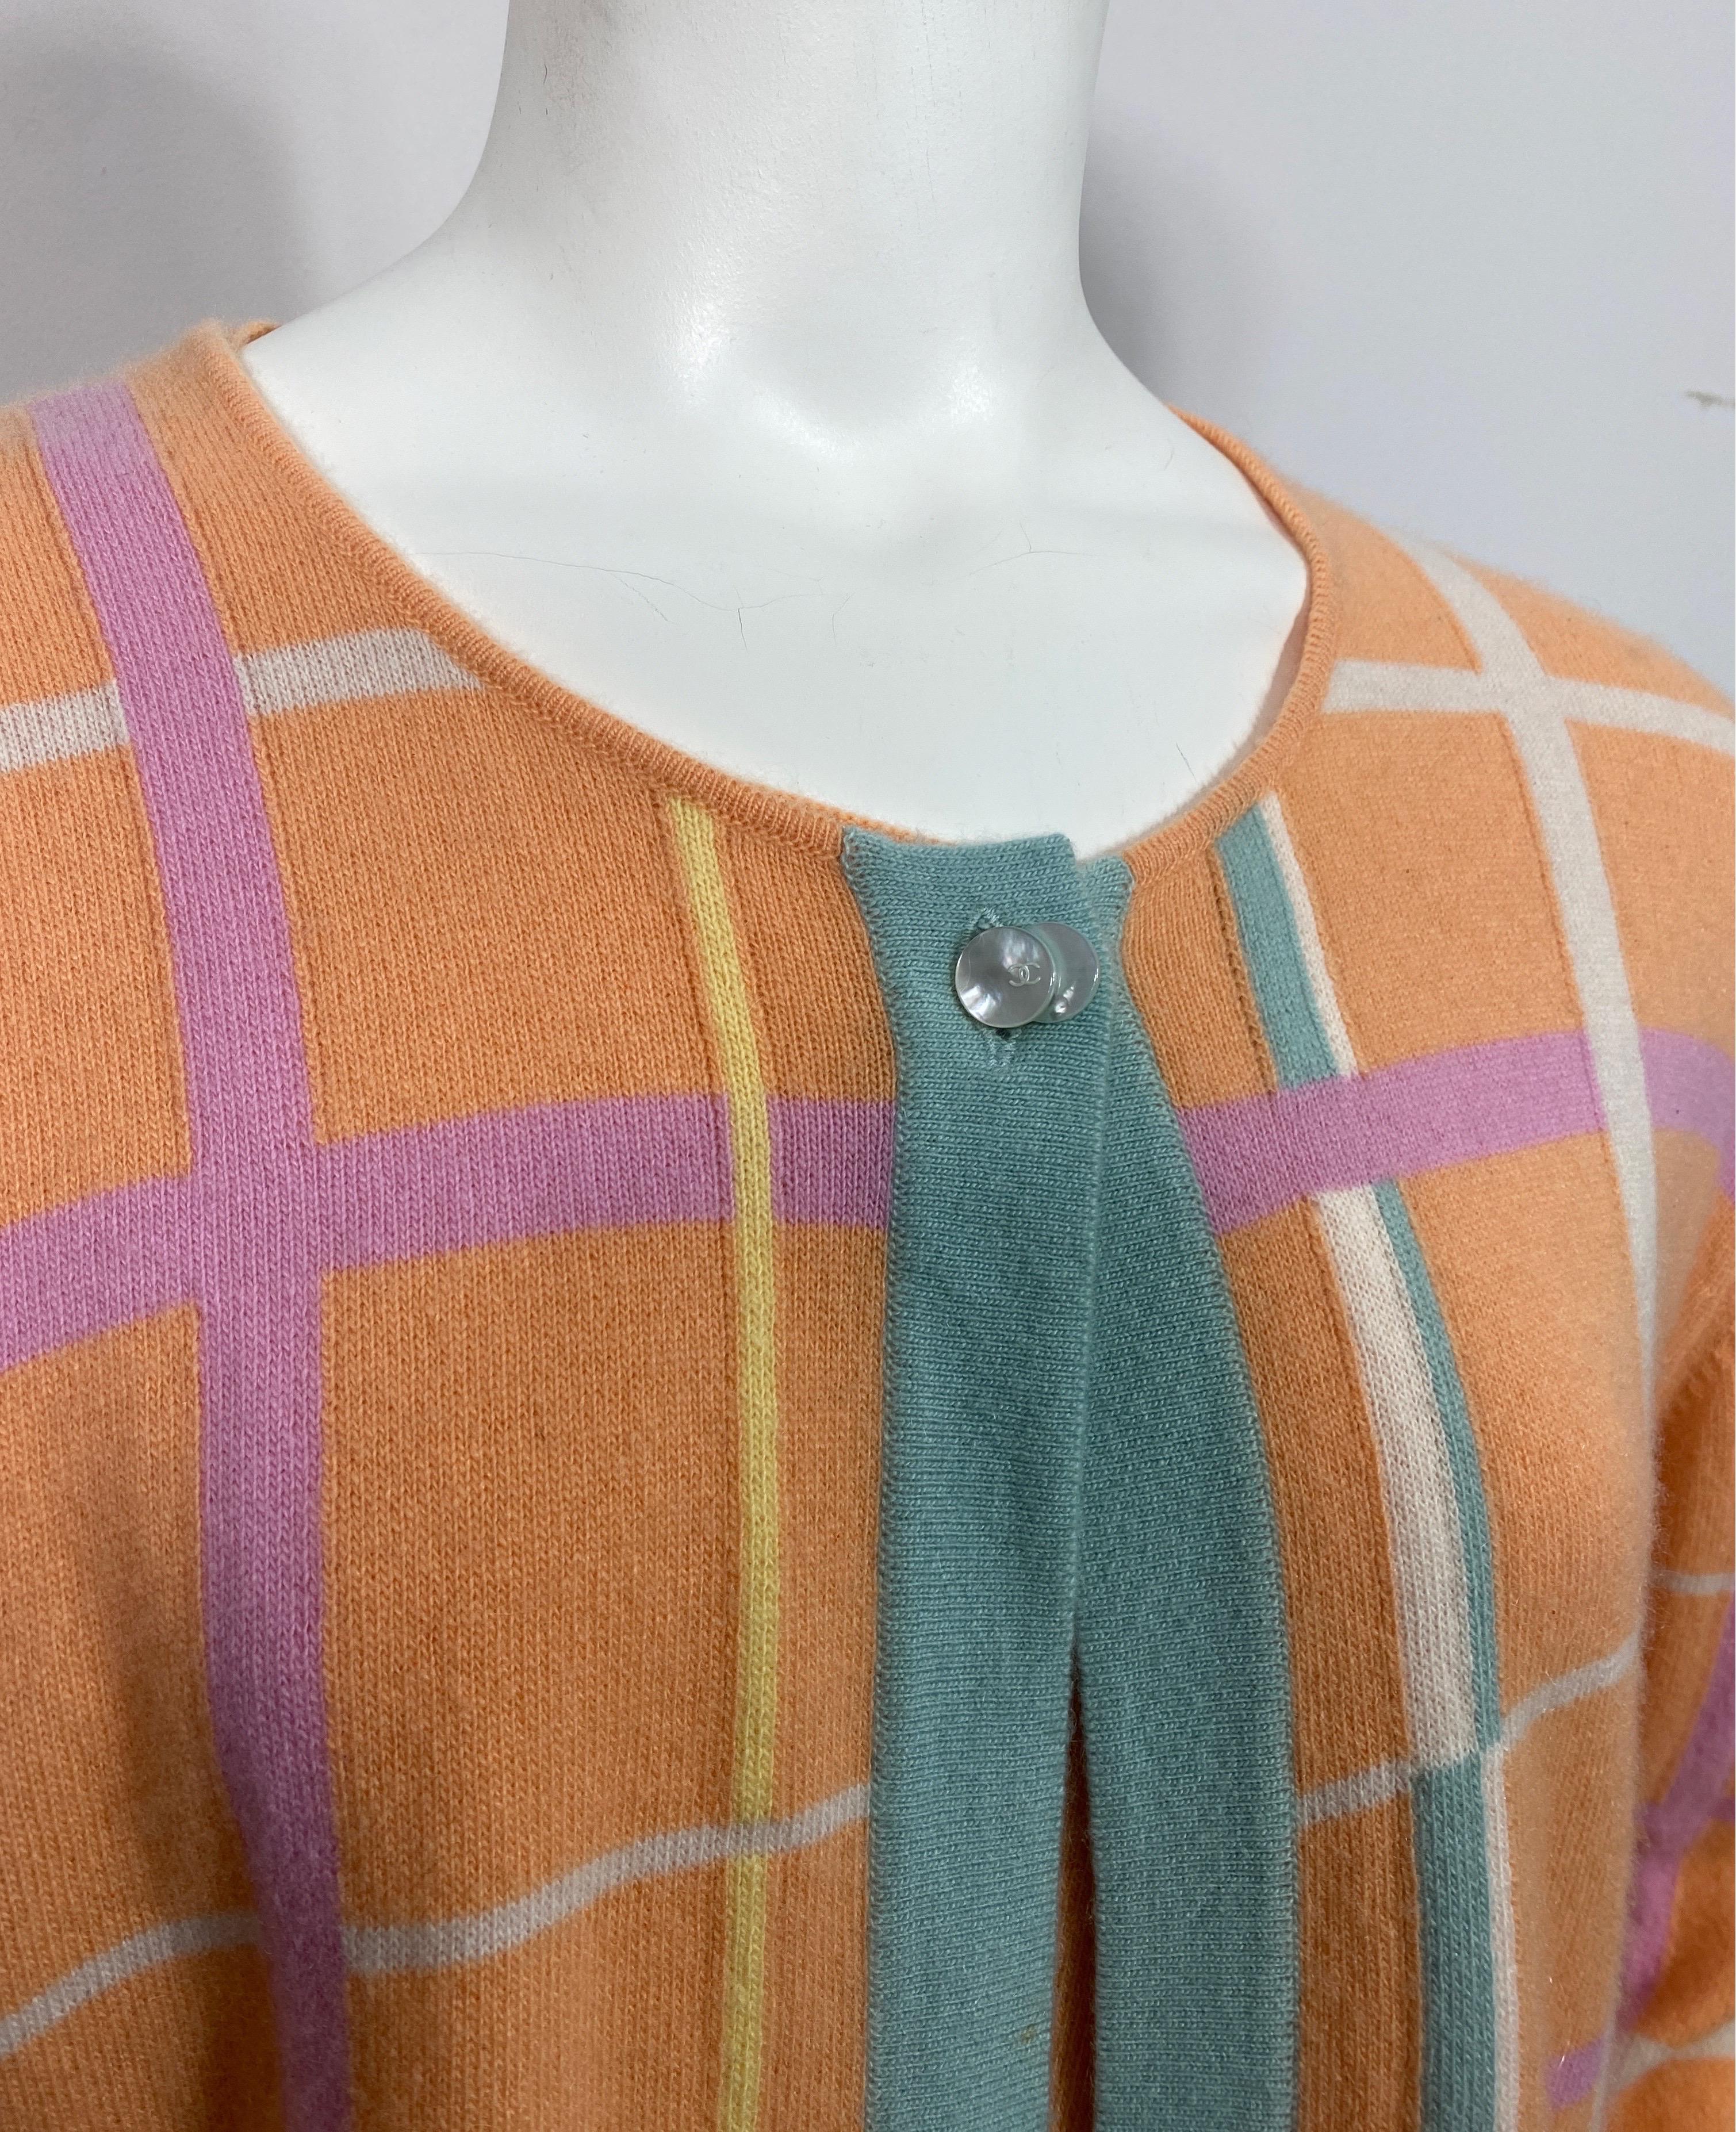 Chanel 1999 Cruise Collection Melon and Pastel Cashmere Sweater Set-Size 42 2